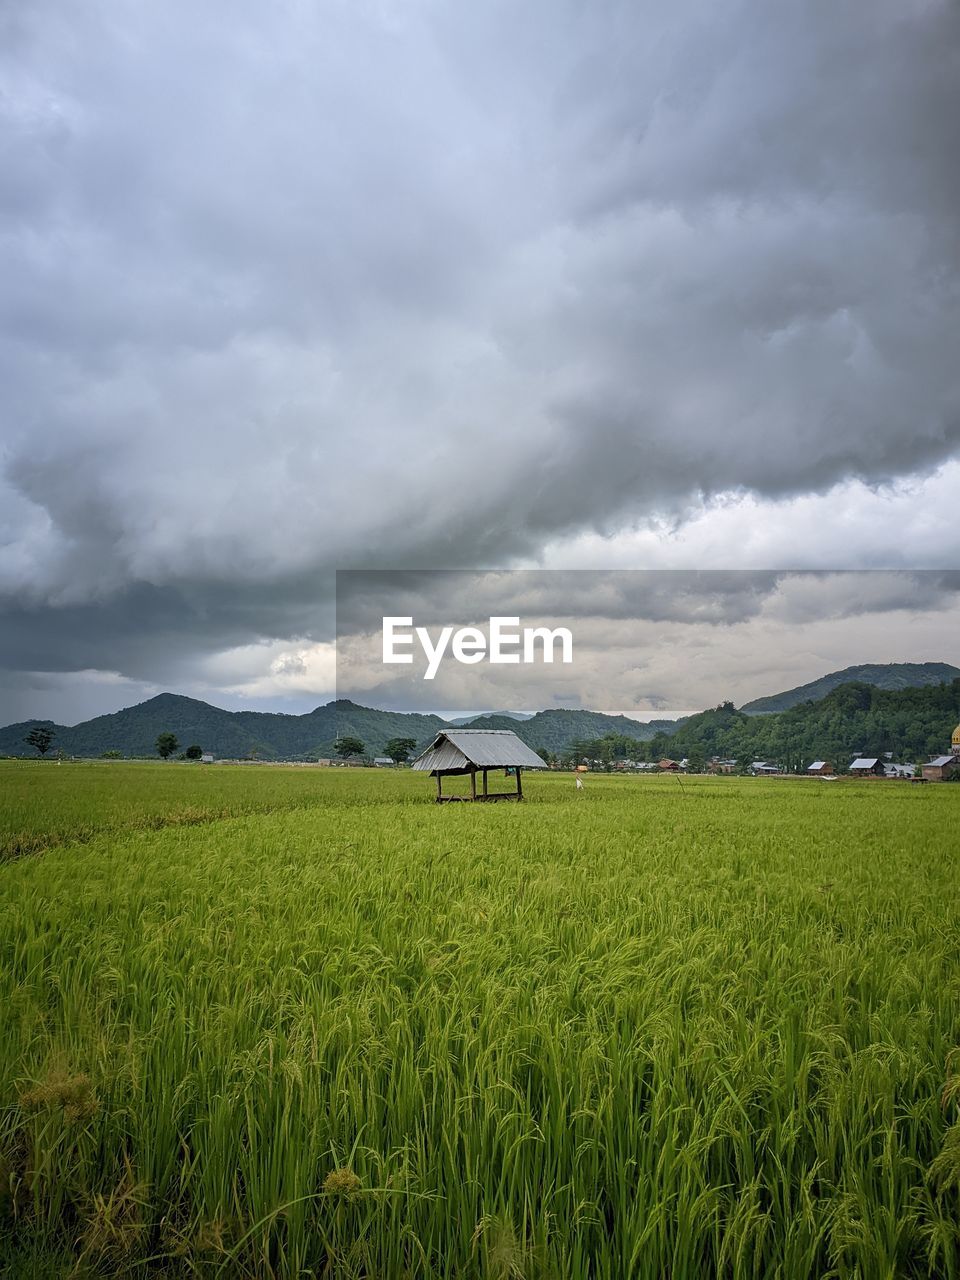 environment, landscape, cloud, land, sky, field, plant, grass, rural scene, grassland, agriculture, nature, scenics - nature, horizon, beauty in nature, plain, green, crop, paddy field, mountain, meadow, growth, prairie, farm, no people, pasture, cereal plant, rural area, tranquility, storm, outdoors, overcast, dramatic sky, food, food and drink, social issues, tranquil scene, environmental conservation, day, storm cloud, non-urban scene, mountain range, tree, cloudscape, architecture